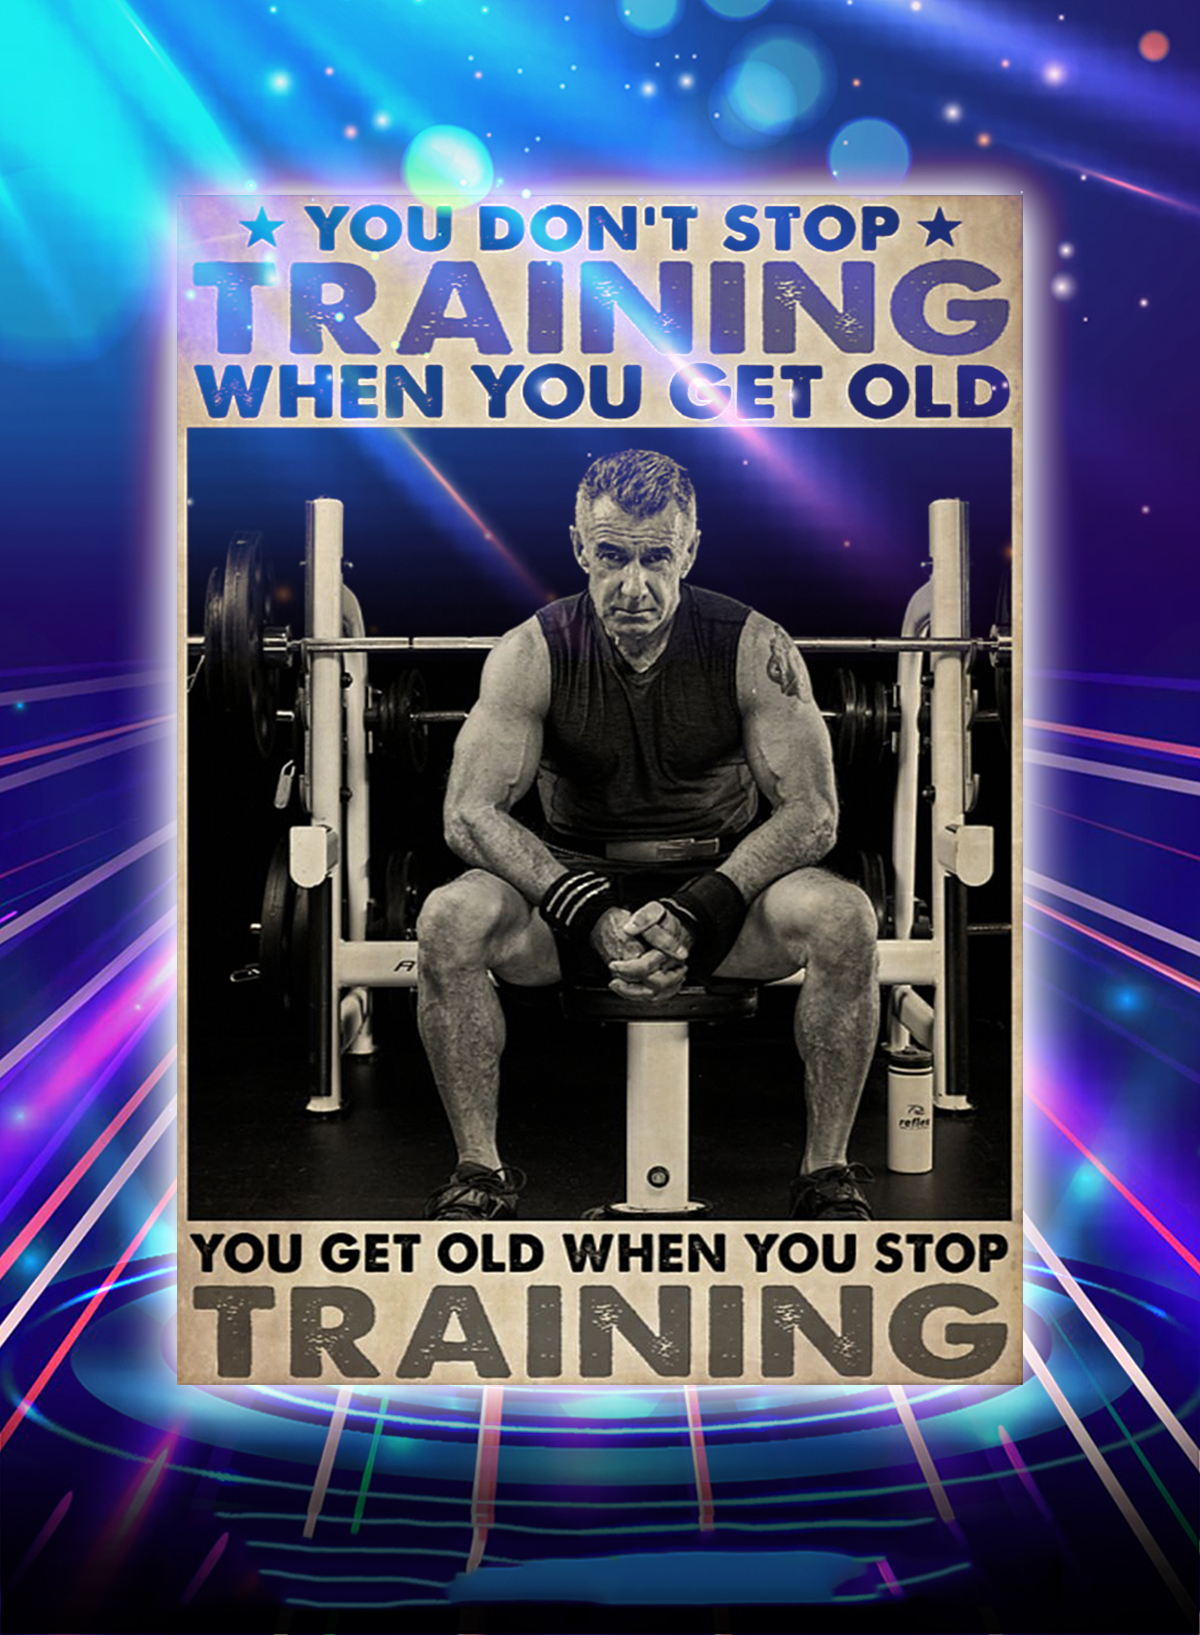 Bodybuilding you don't stop training when you get old poster - A1